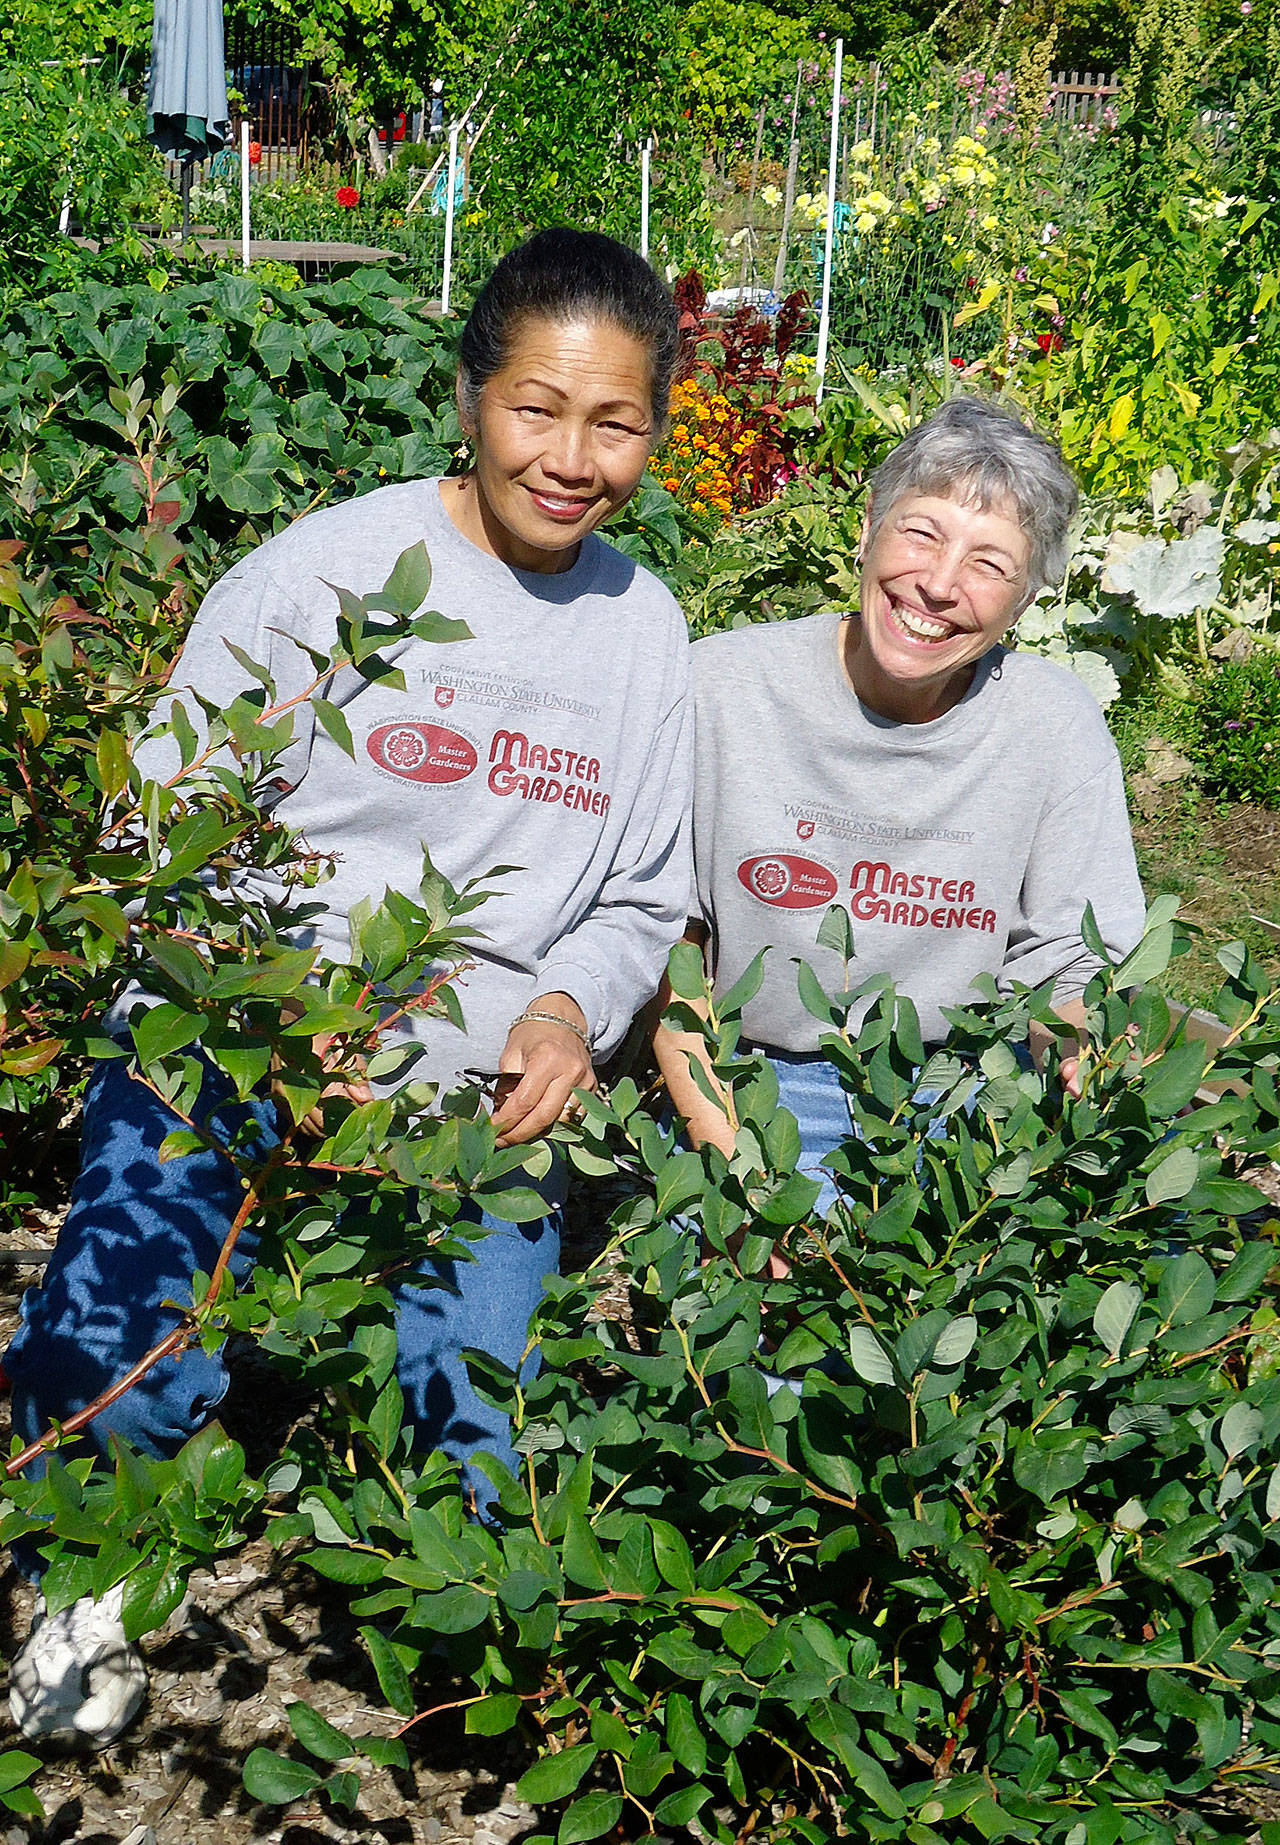 Clallam County Master Gardeners Audreen Williams, left, and Jeanette Stehr-Green will talk about growing blueberries in the Pacific Northwest at the Master Gardener Demonstration Garden on Sept. 7. Submitted photo